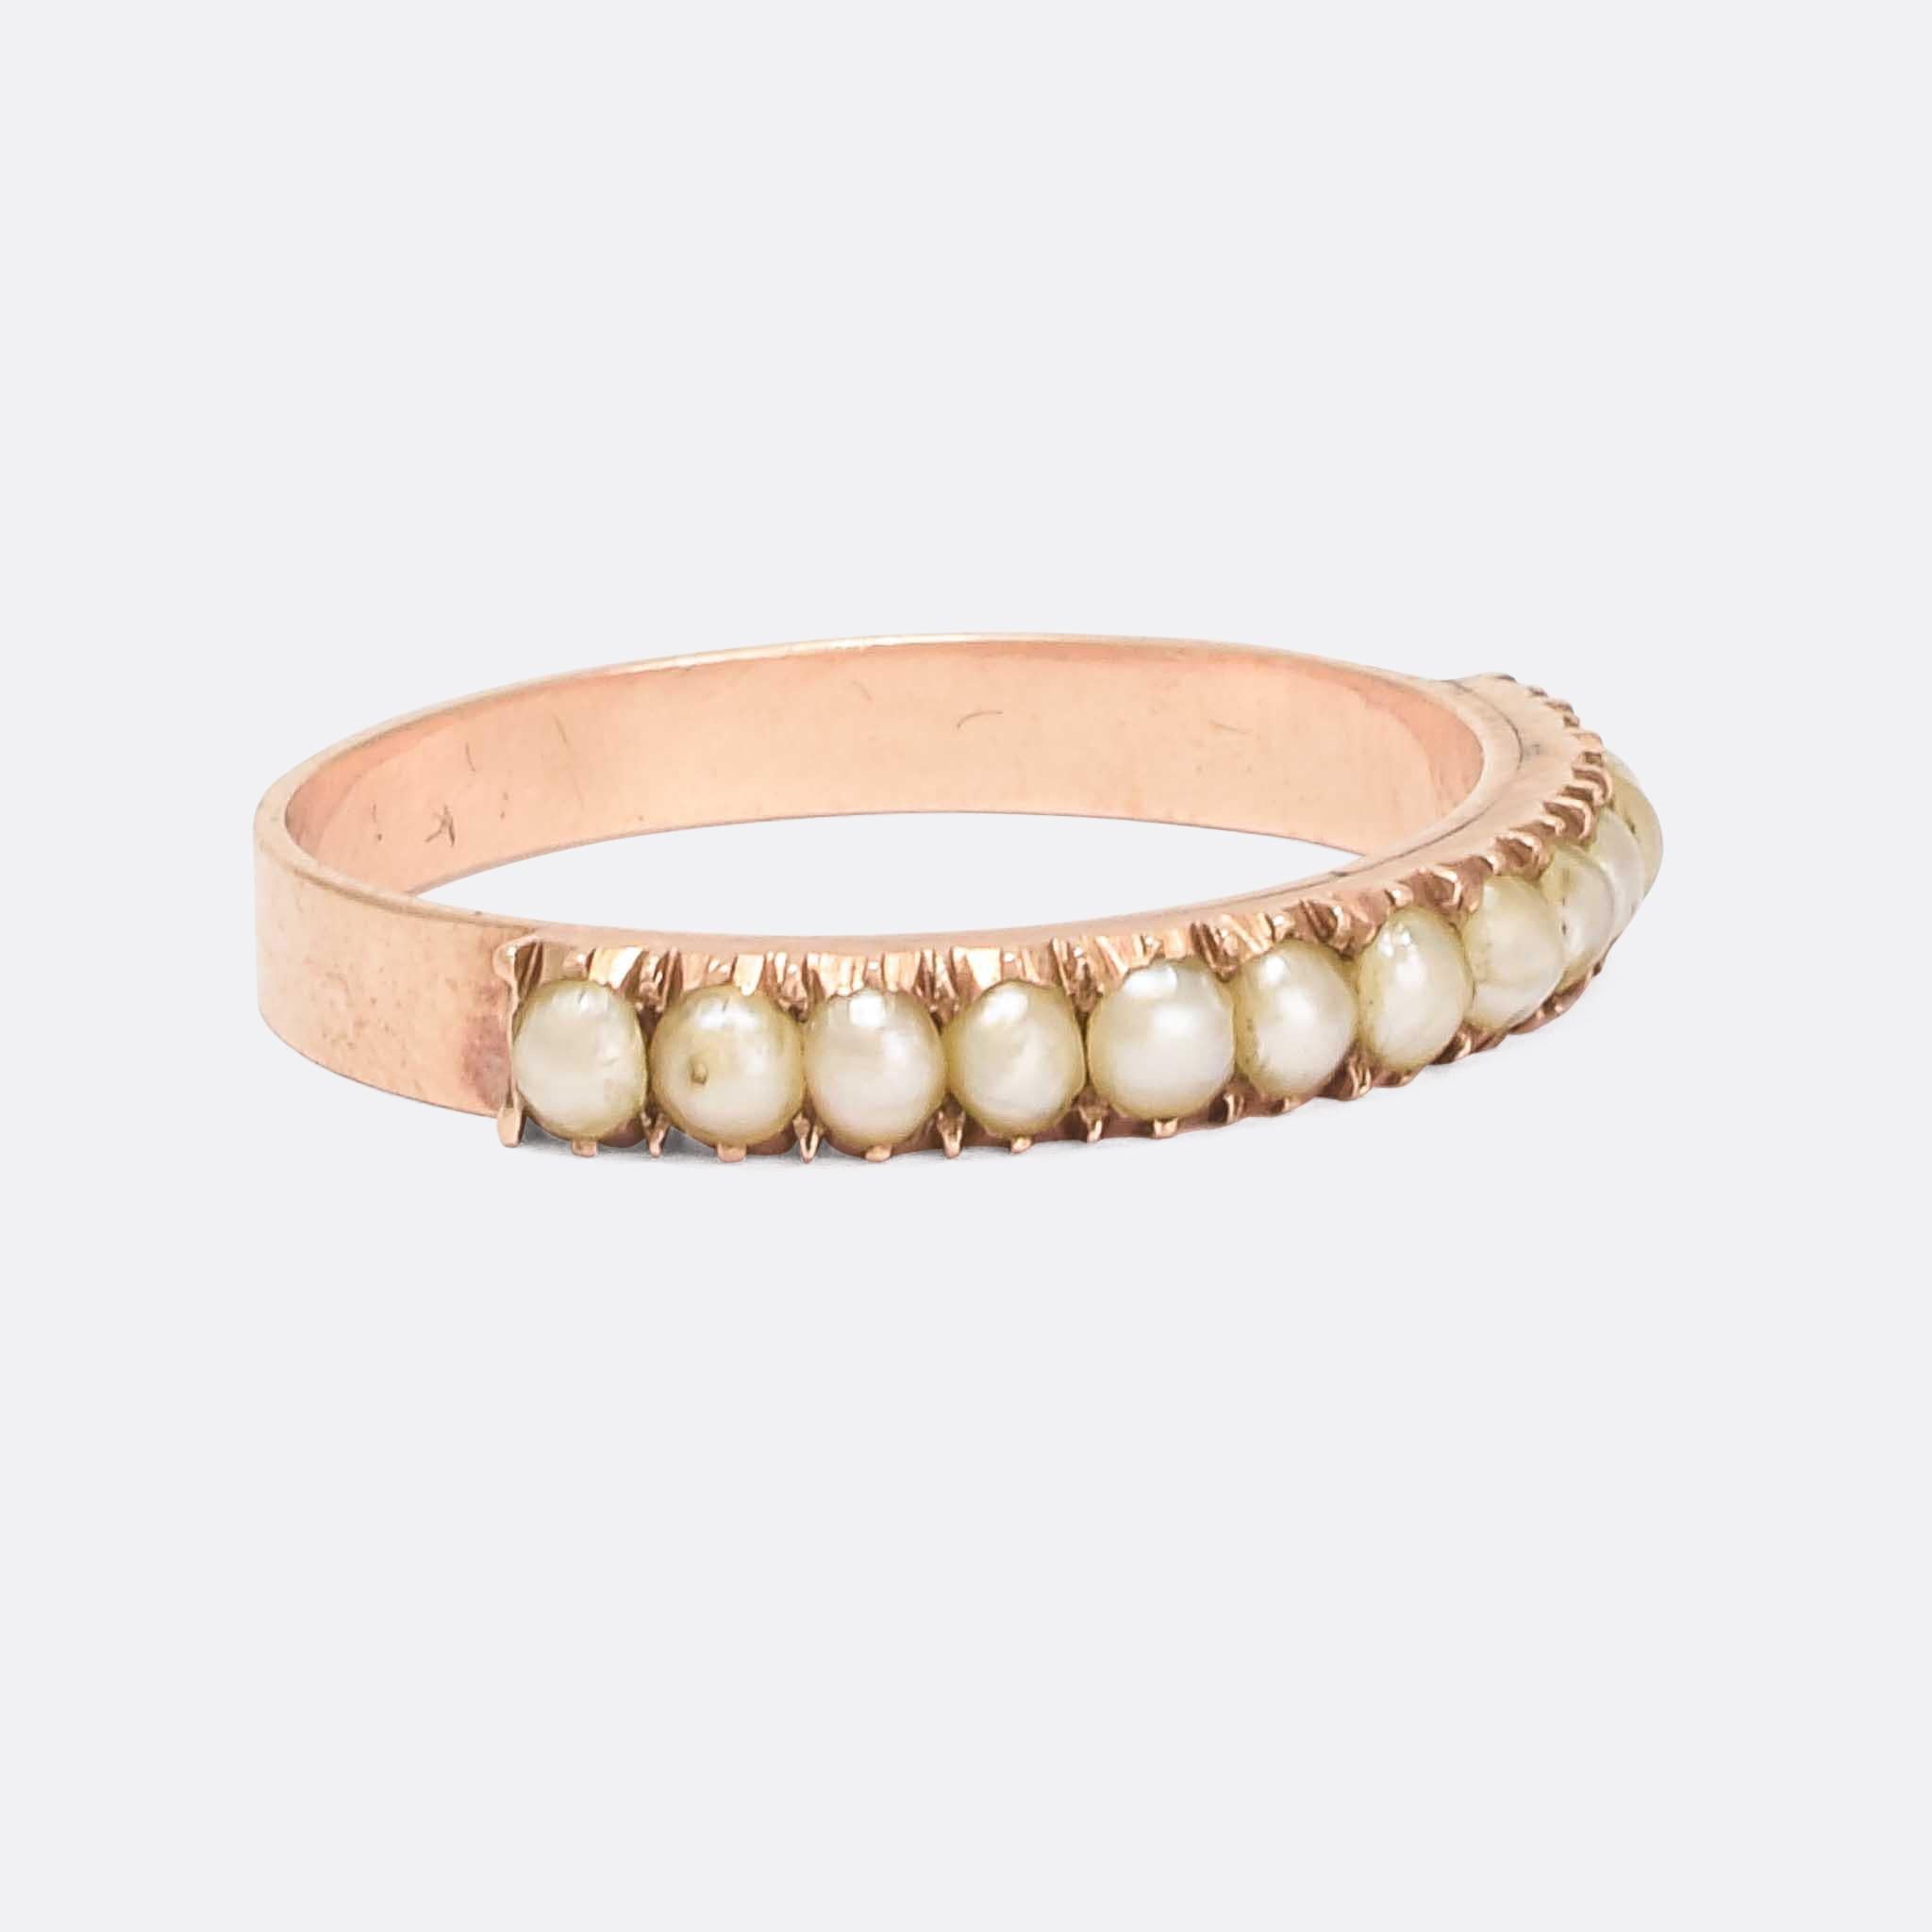 Gorgeous late Georgian pearl half-hoop dating from the 1830s. It's modelled in 15 karat rose gold, with flat band and cut-down pie crust settings. The slim profile makes it ideal for stacking.

STONES 
Pearl

RING SIZE
8.5 US

MEASUREMENTS 
Width at